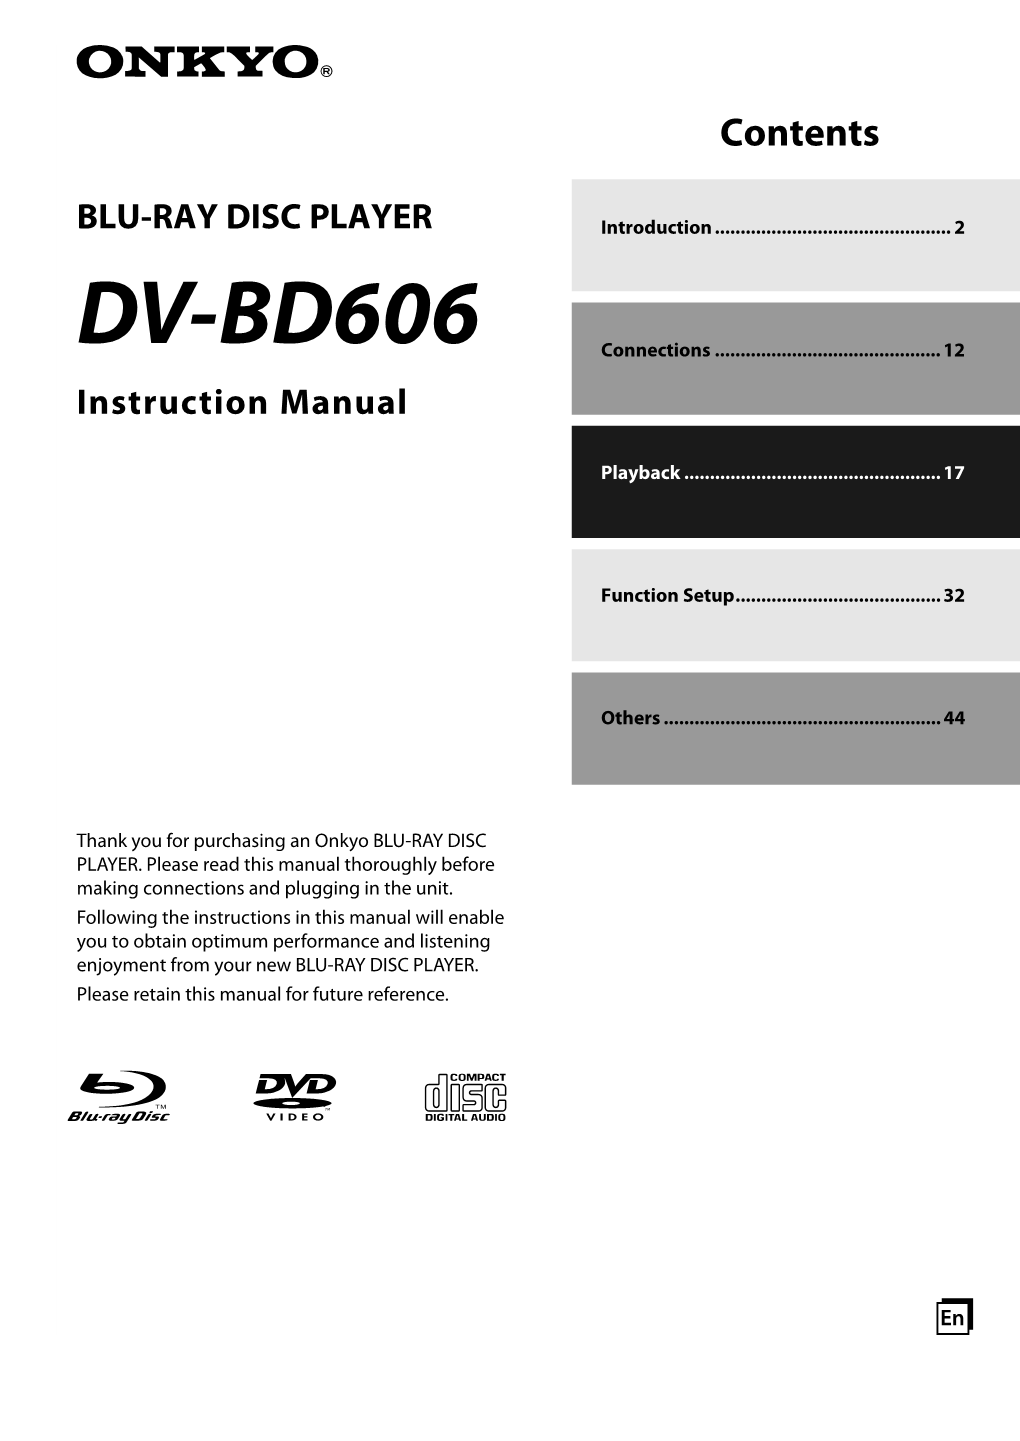 DV-BD606 Connections